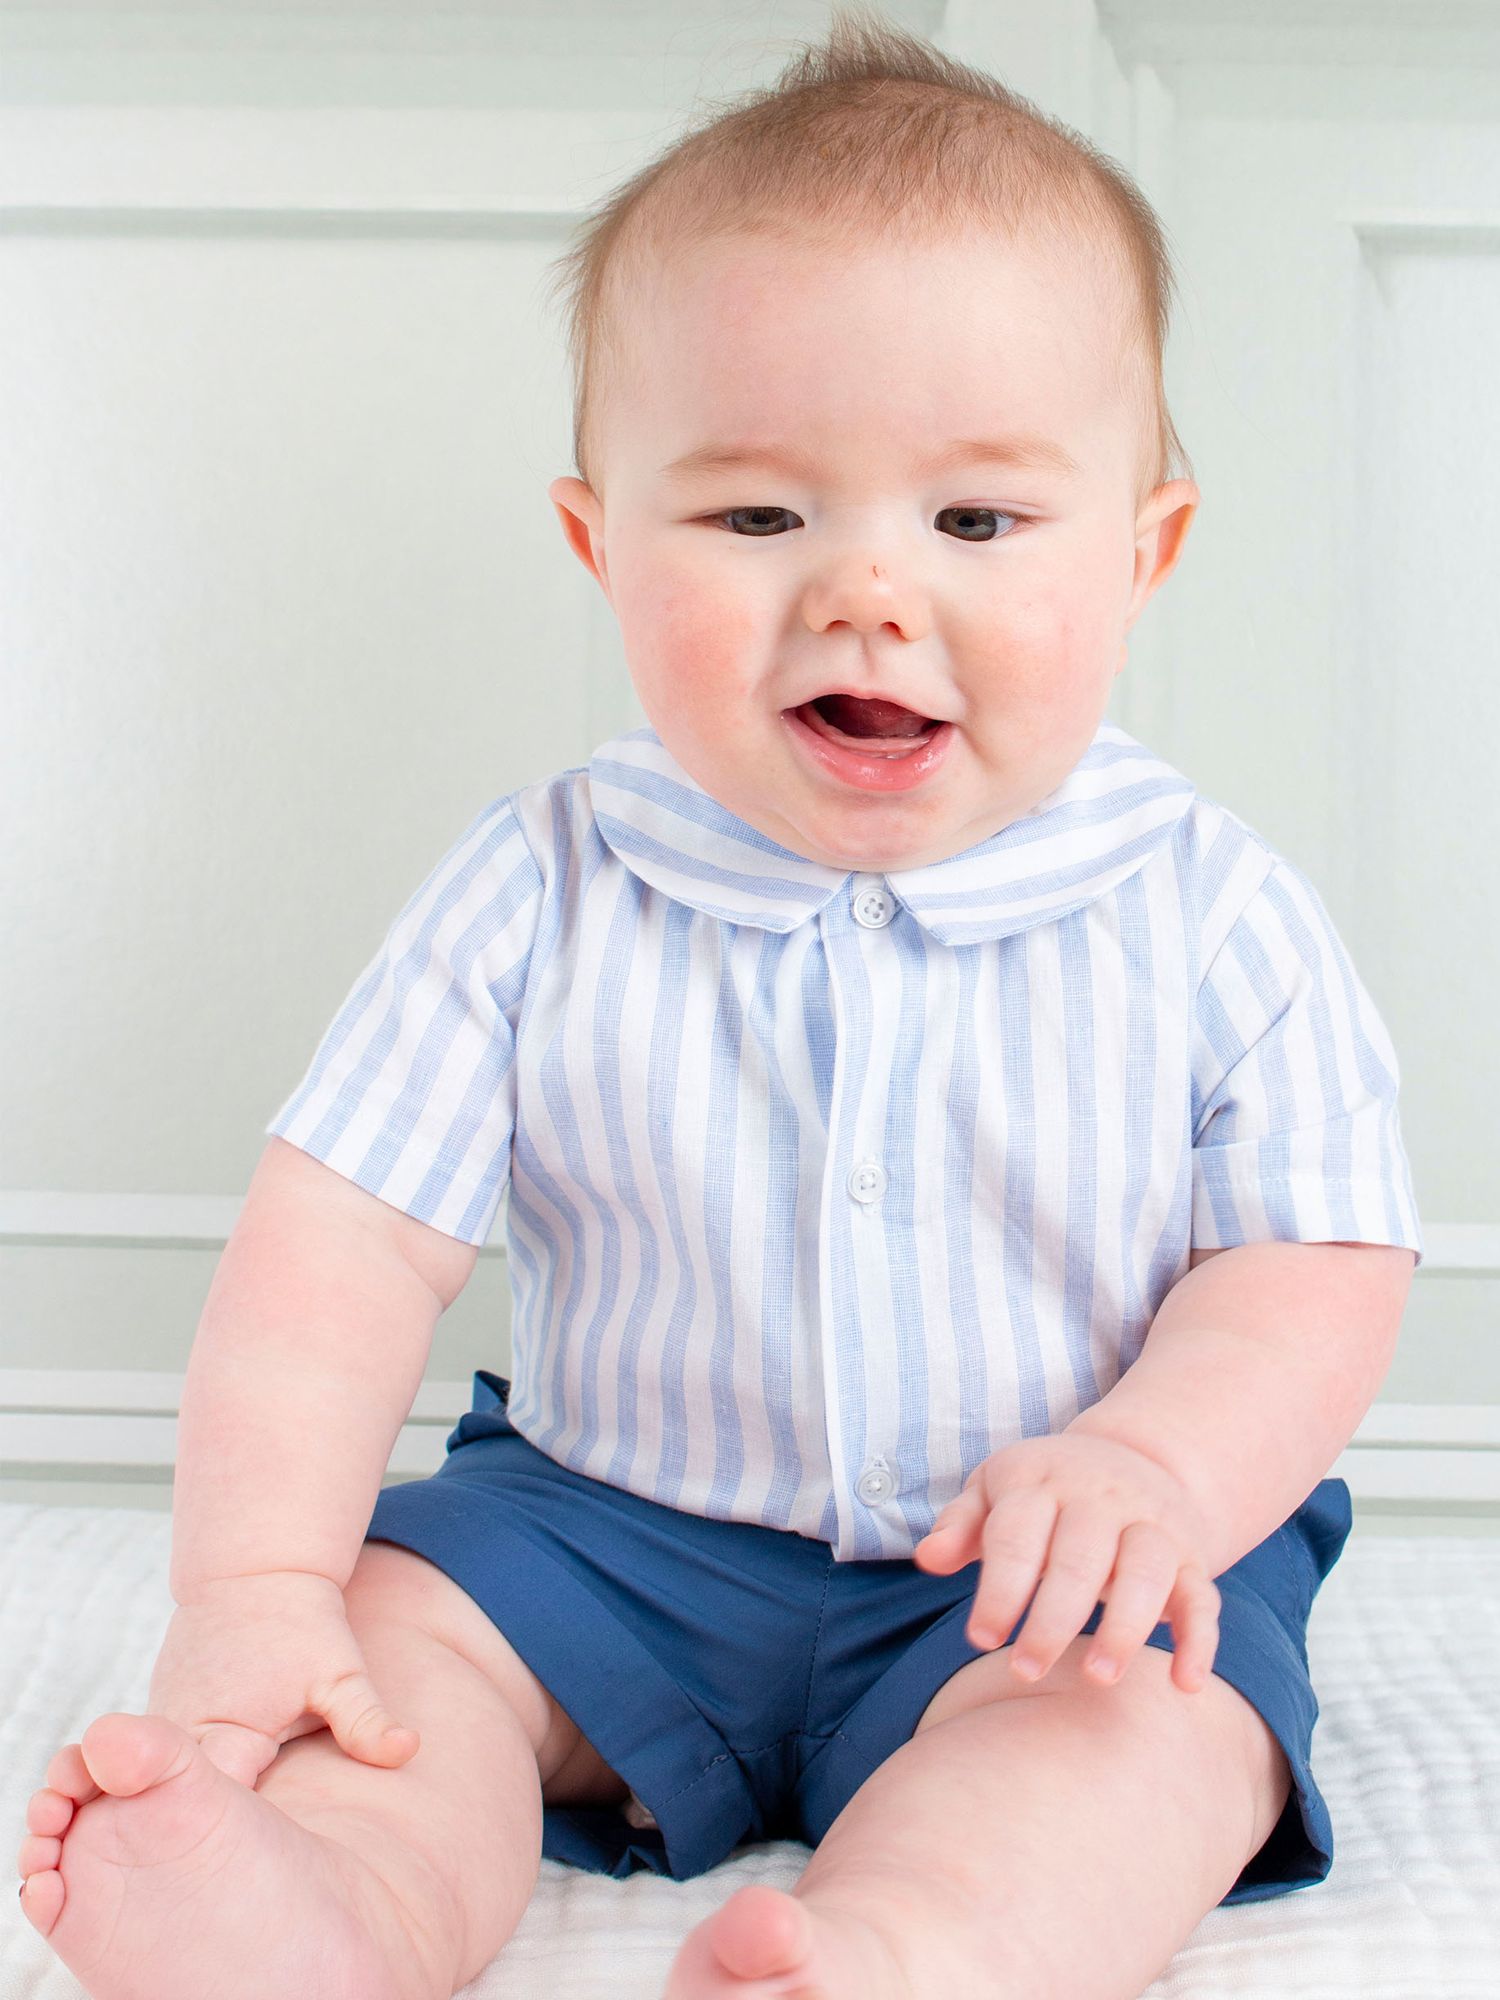 Trotters Baby The Rupert Shirt & Shorts Set, Navy/Pale Blue, 3-6 months